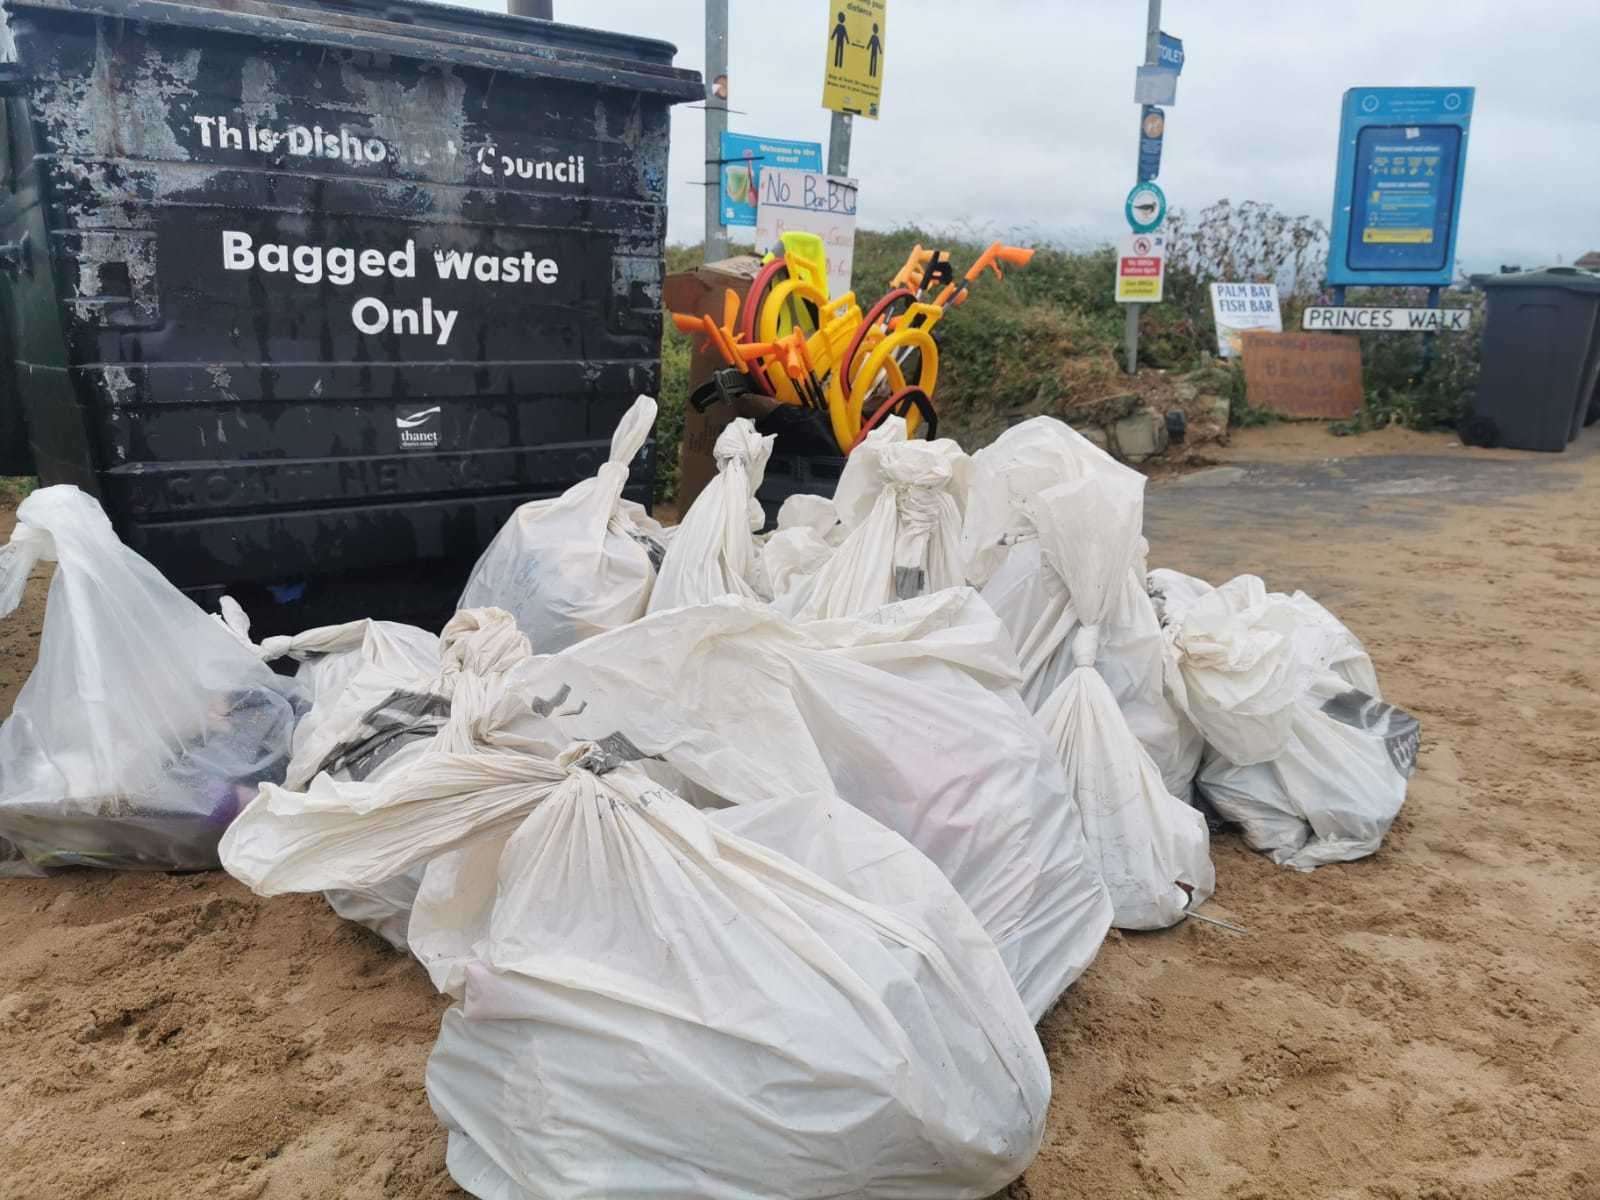 Bags of rubbish are collected from the beach